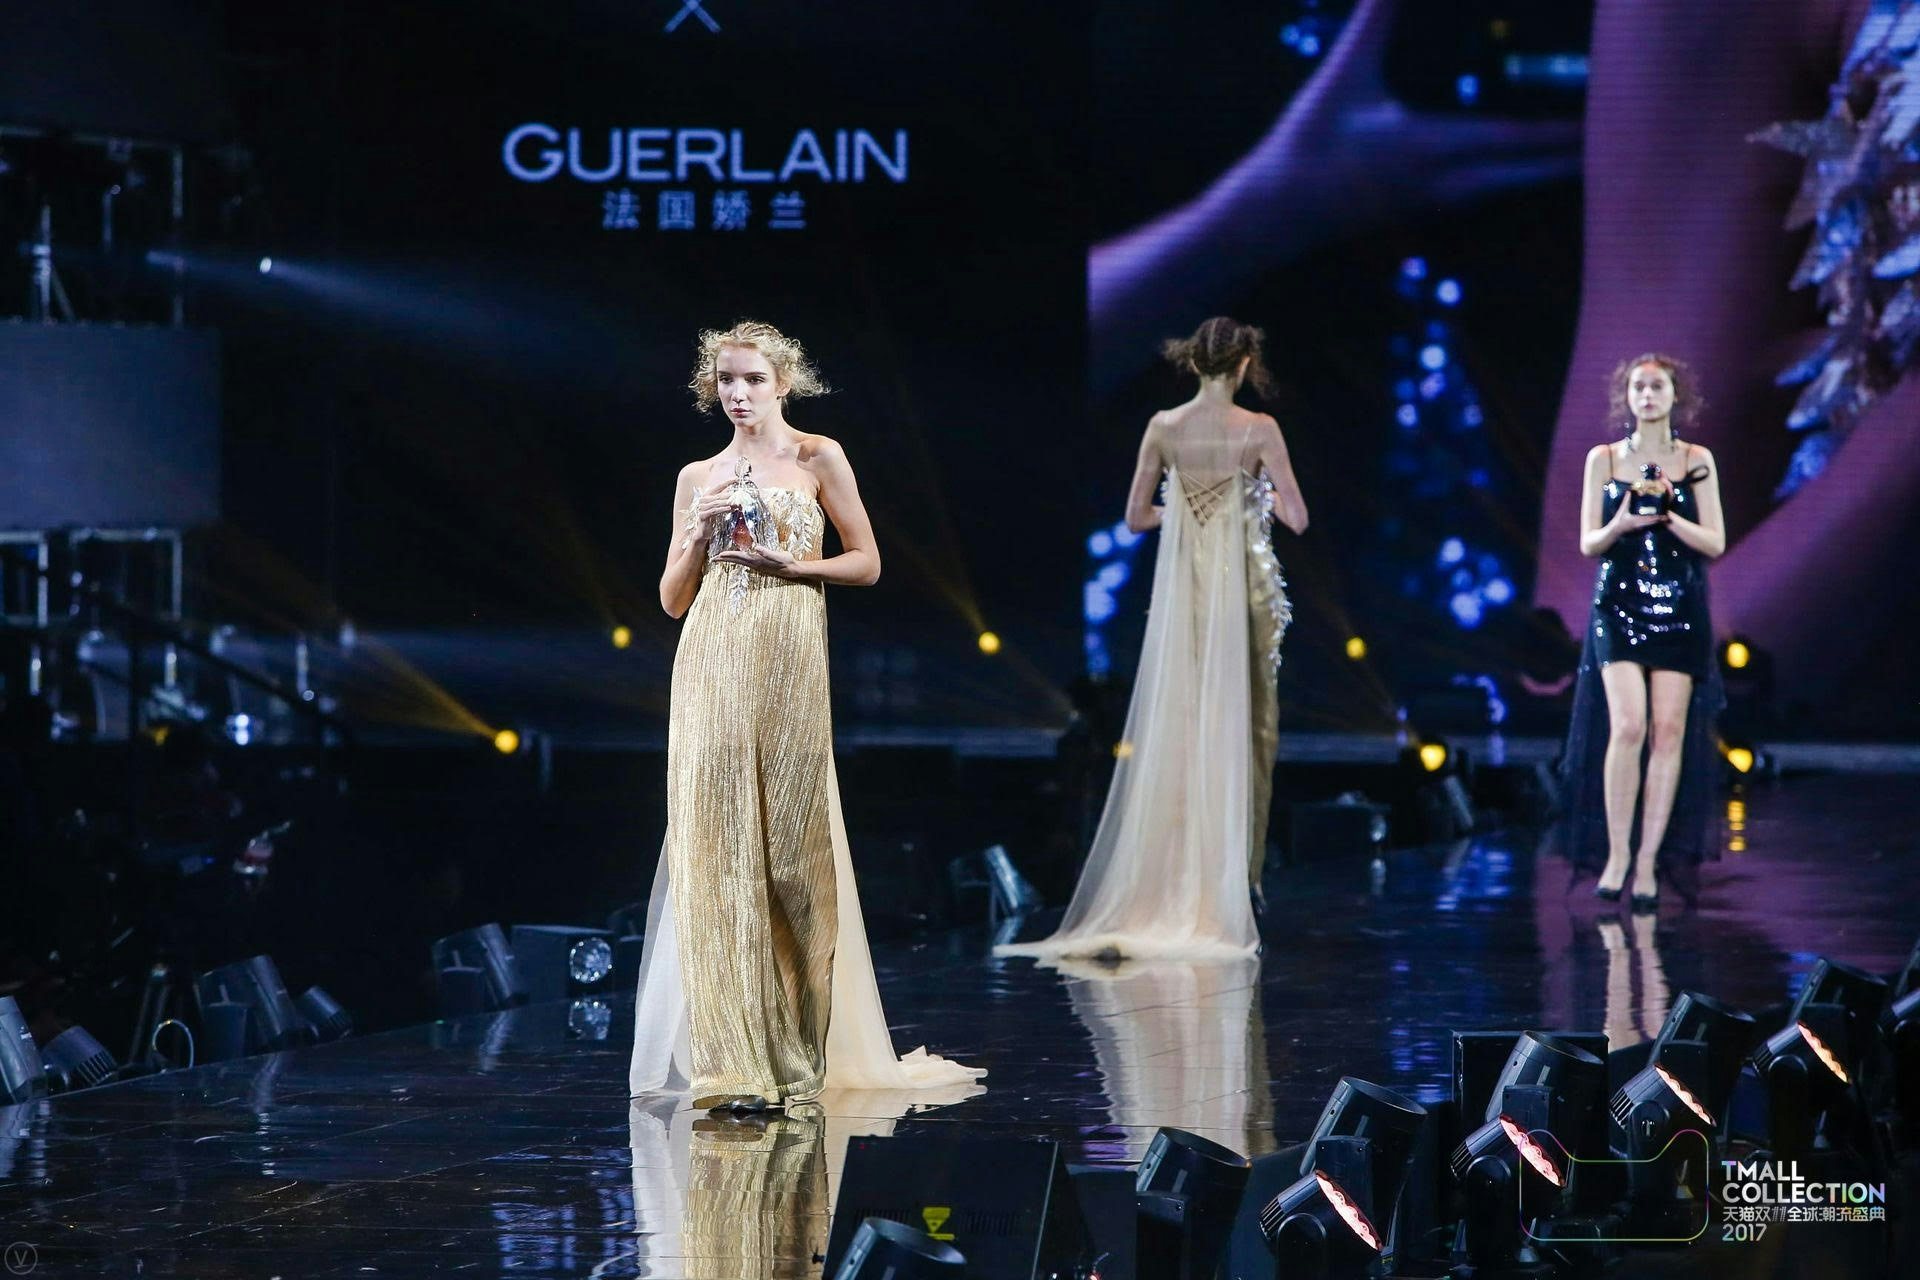 The French premium beauty brand Guerlain participated in this year's Tmall "See Now Buy Now" fashion show. Photo: Alibaba 